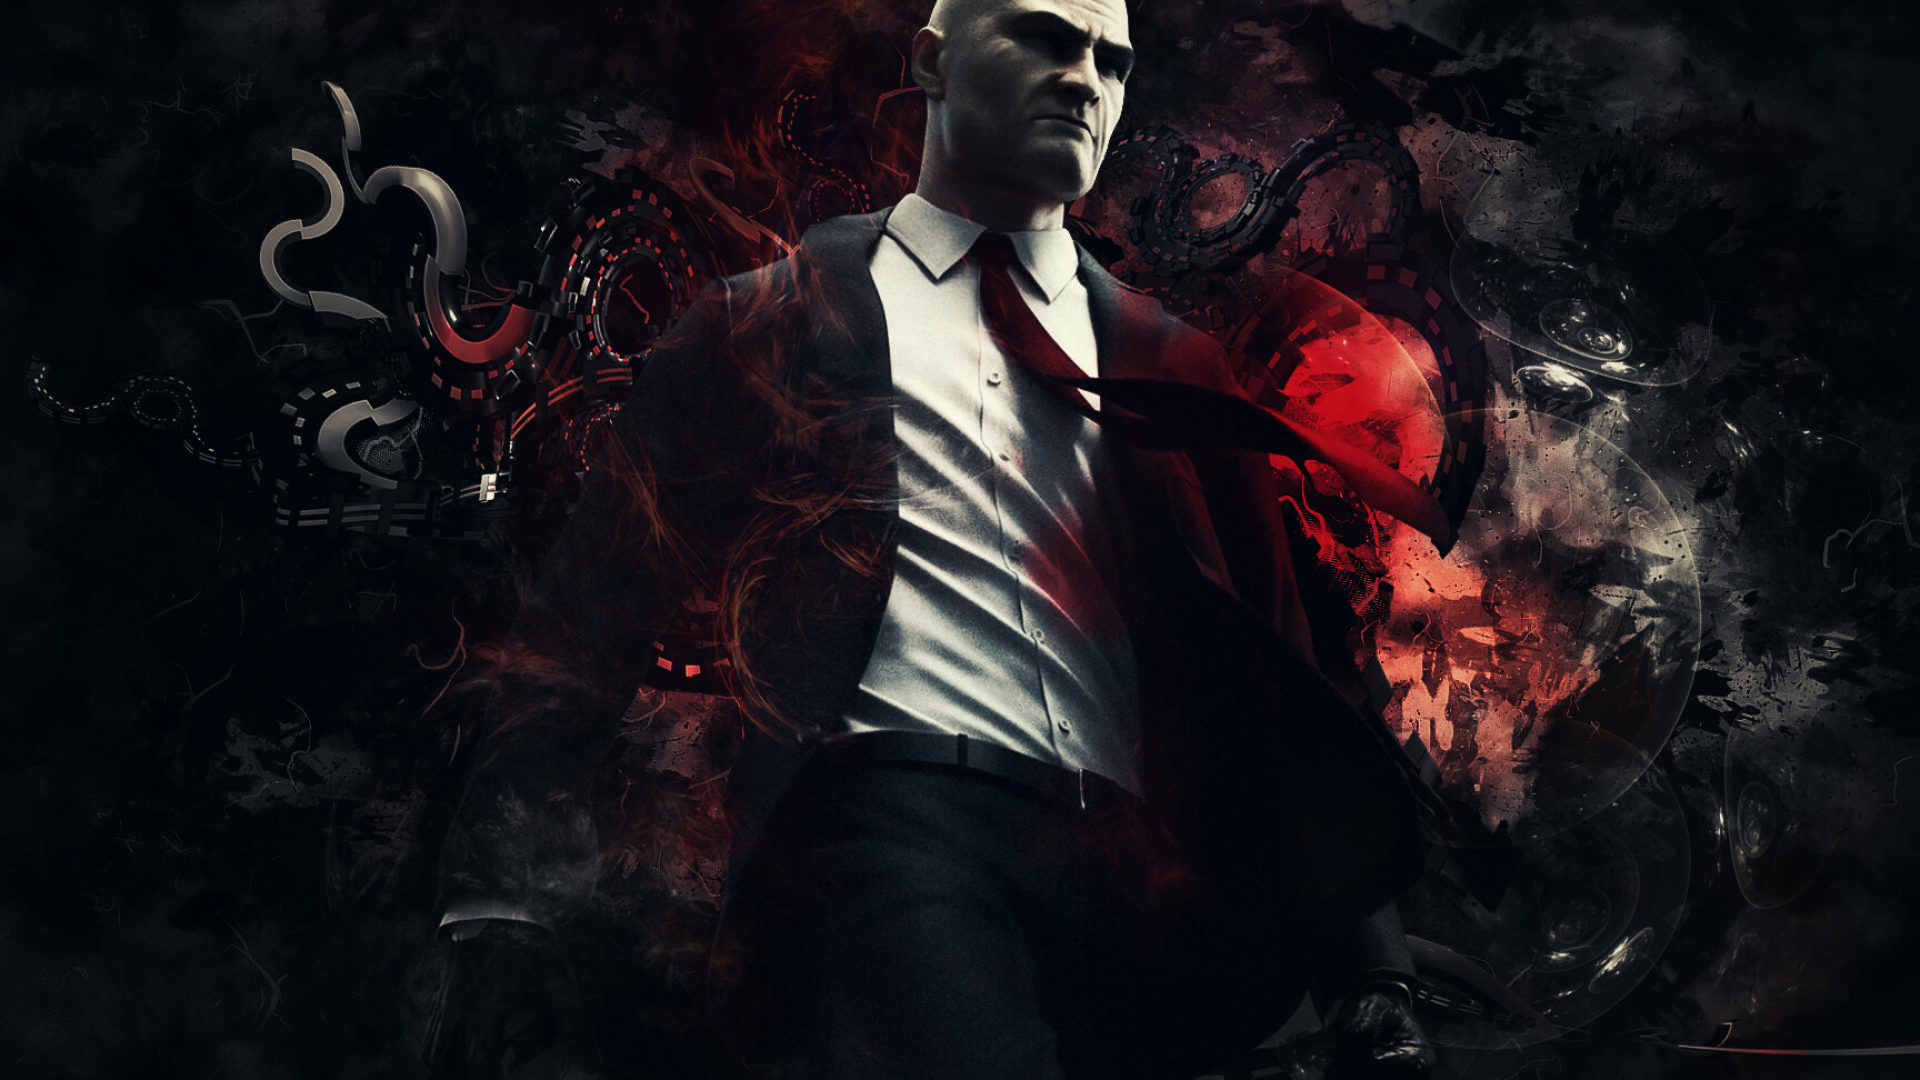 Hitman (Game): The character takes his name from being the 47th clone created by various wealthy criminals from around the world. 1920x1080 Full HD Wallpaper.